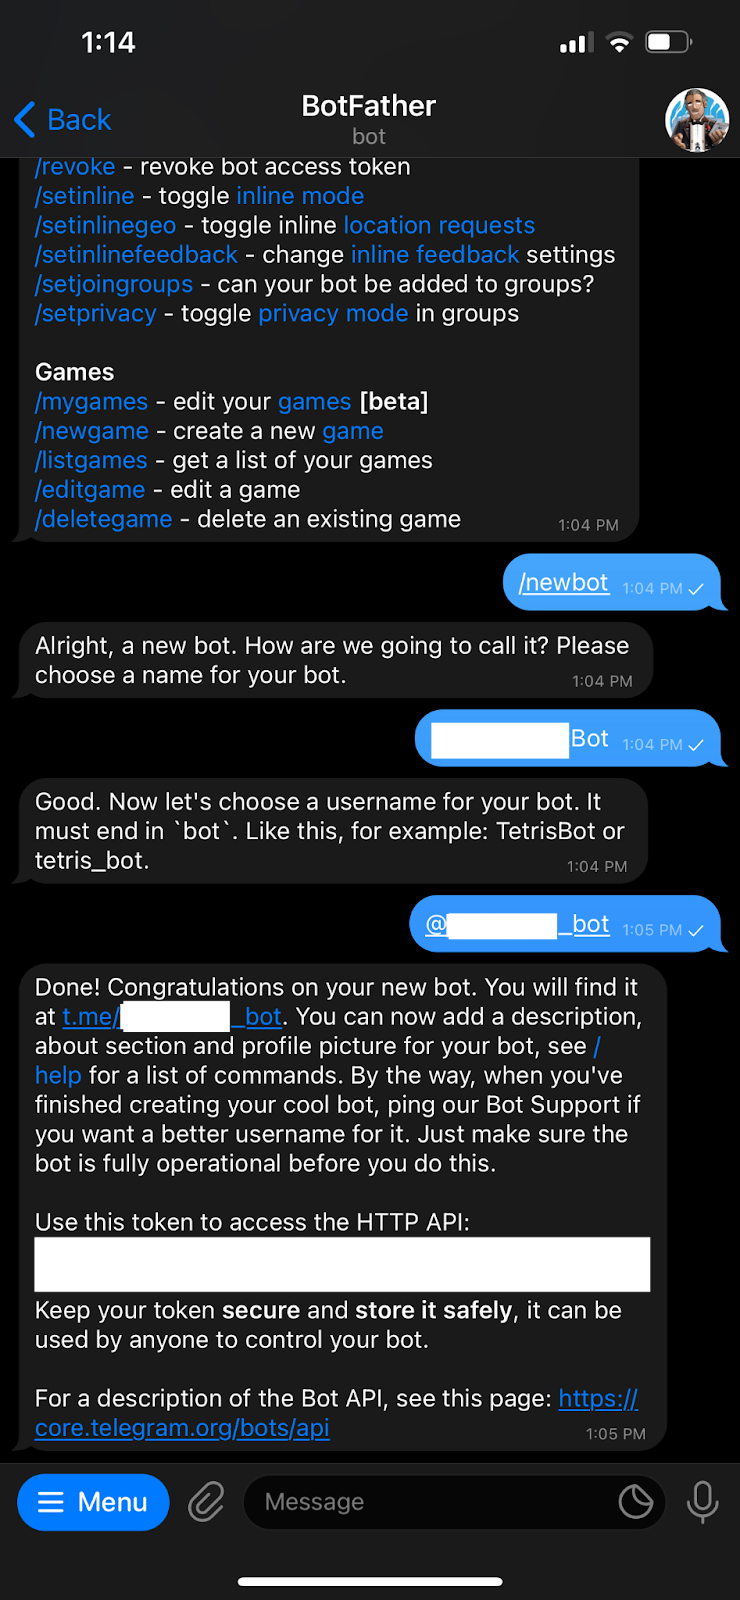 Creating a new telegram bot with BotFather